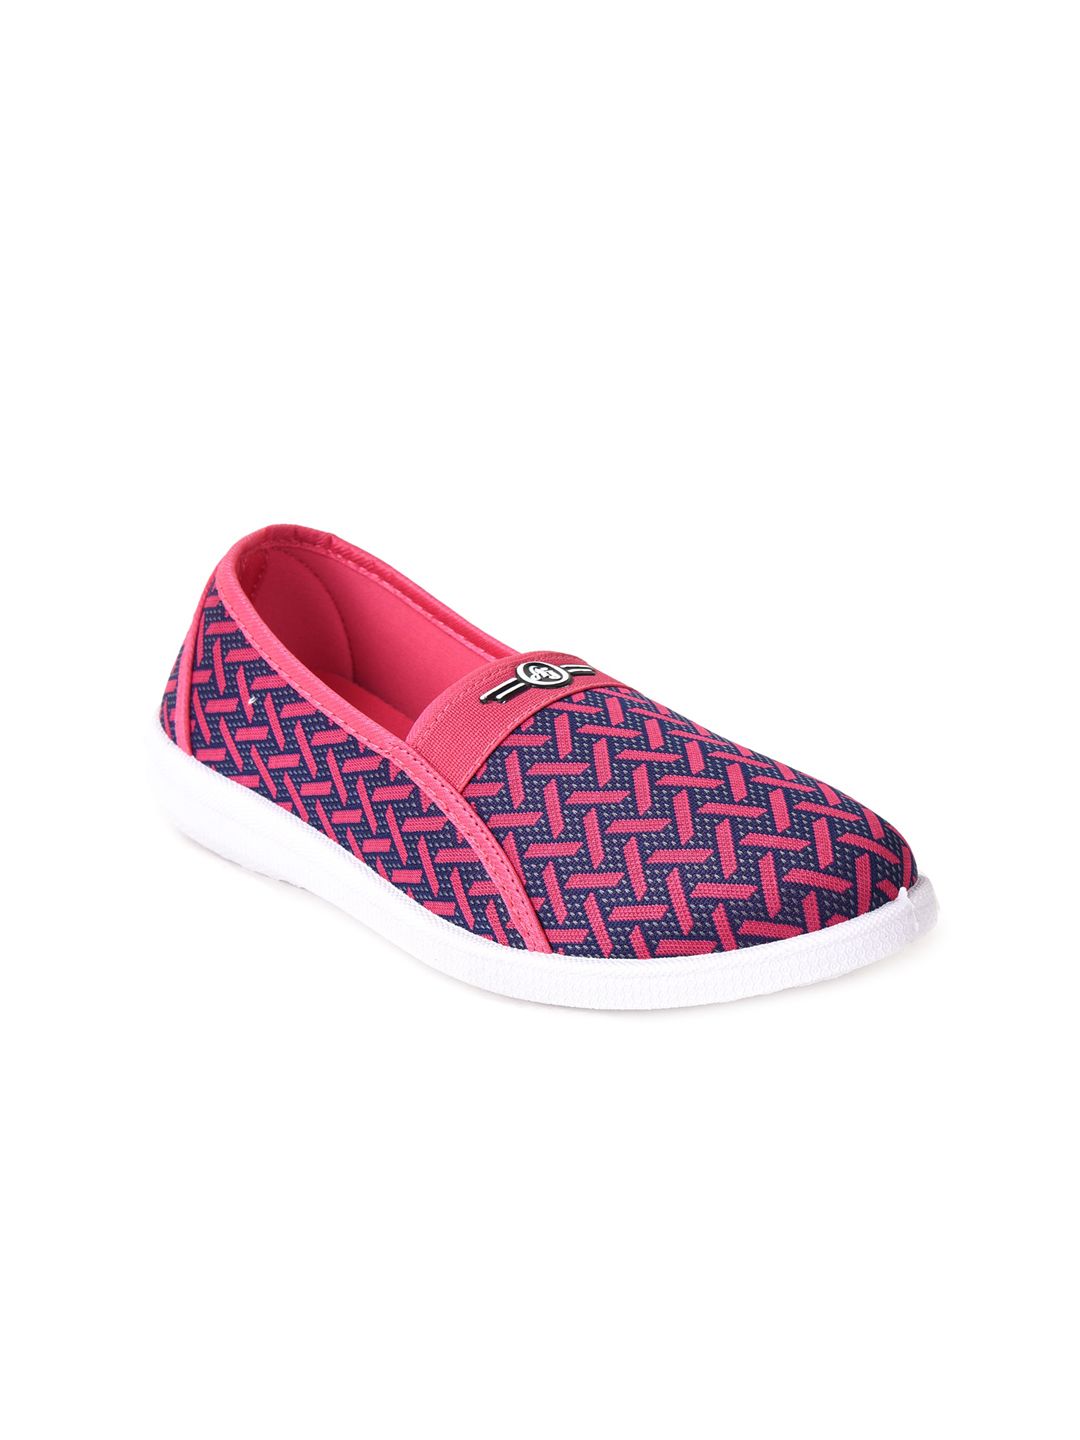 Ajanta Women Woven Design Lightweight Comfort Insole Contrast Sole Slip-On Sneakers Price in India